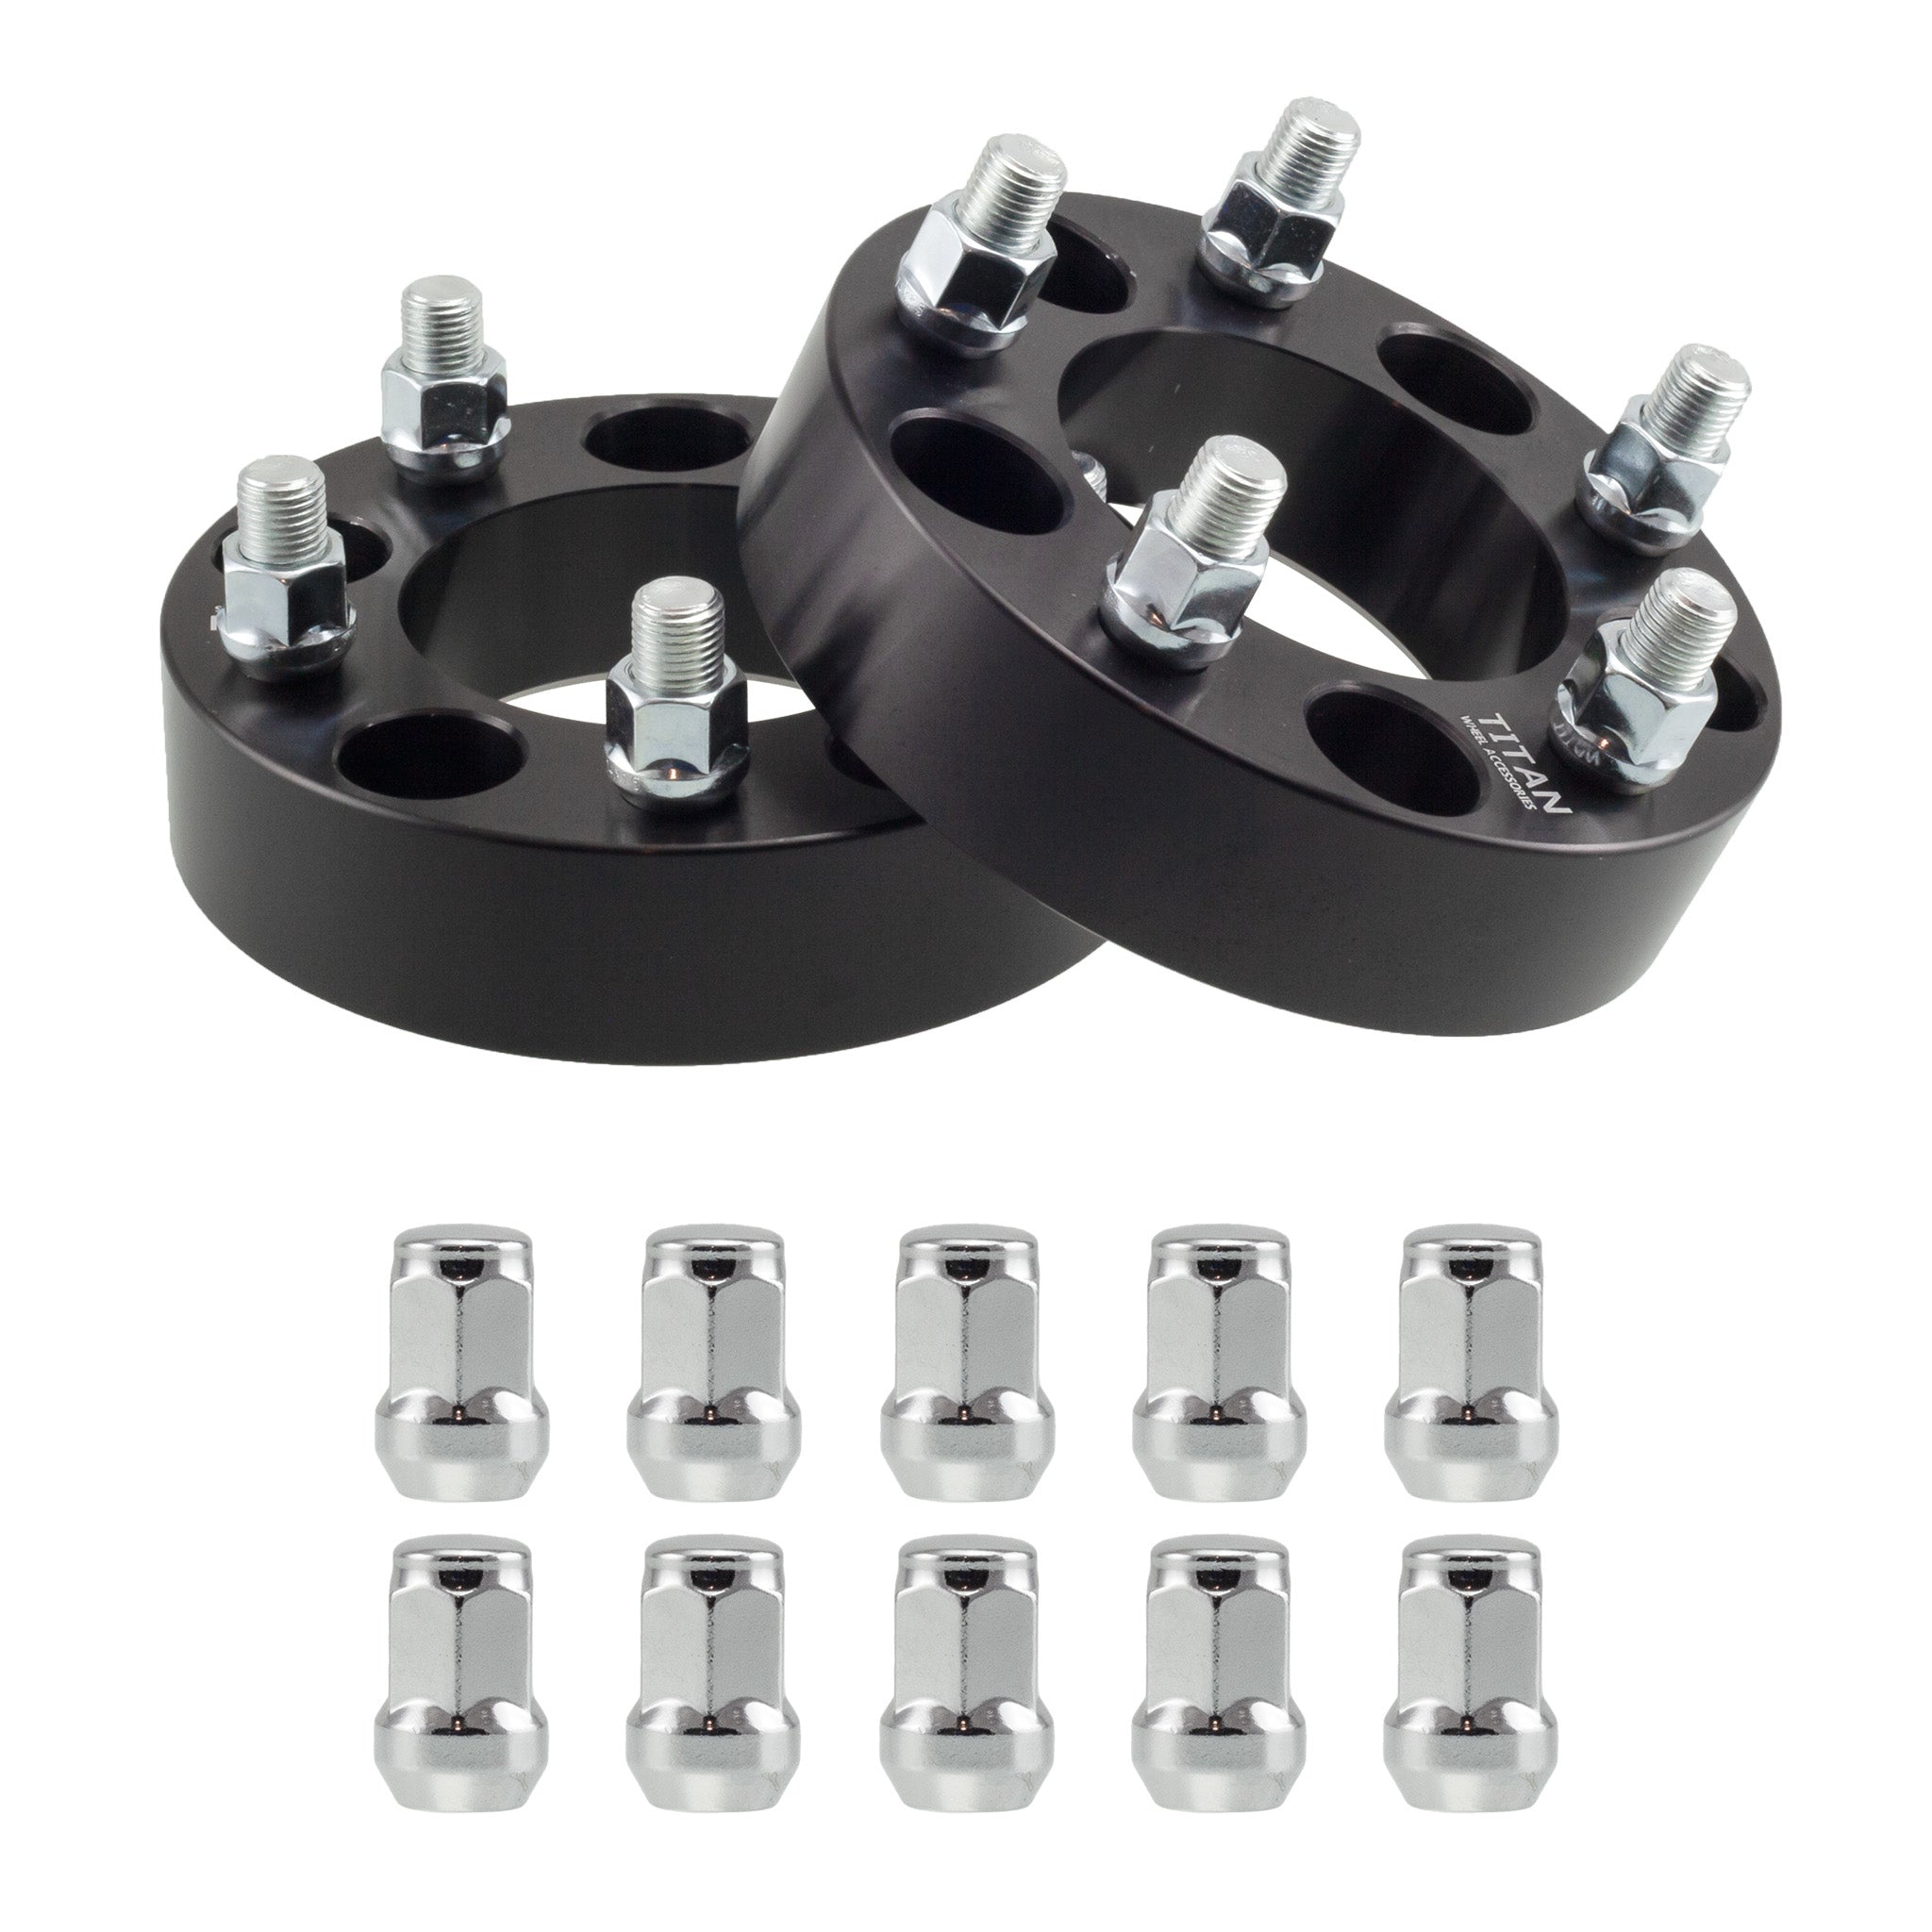 3 Inch Hubcentric Wheel Spacers for Nissan Infiniti Cars | 5x114.3